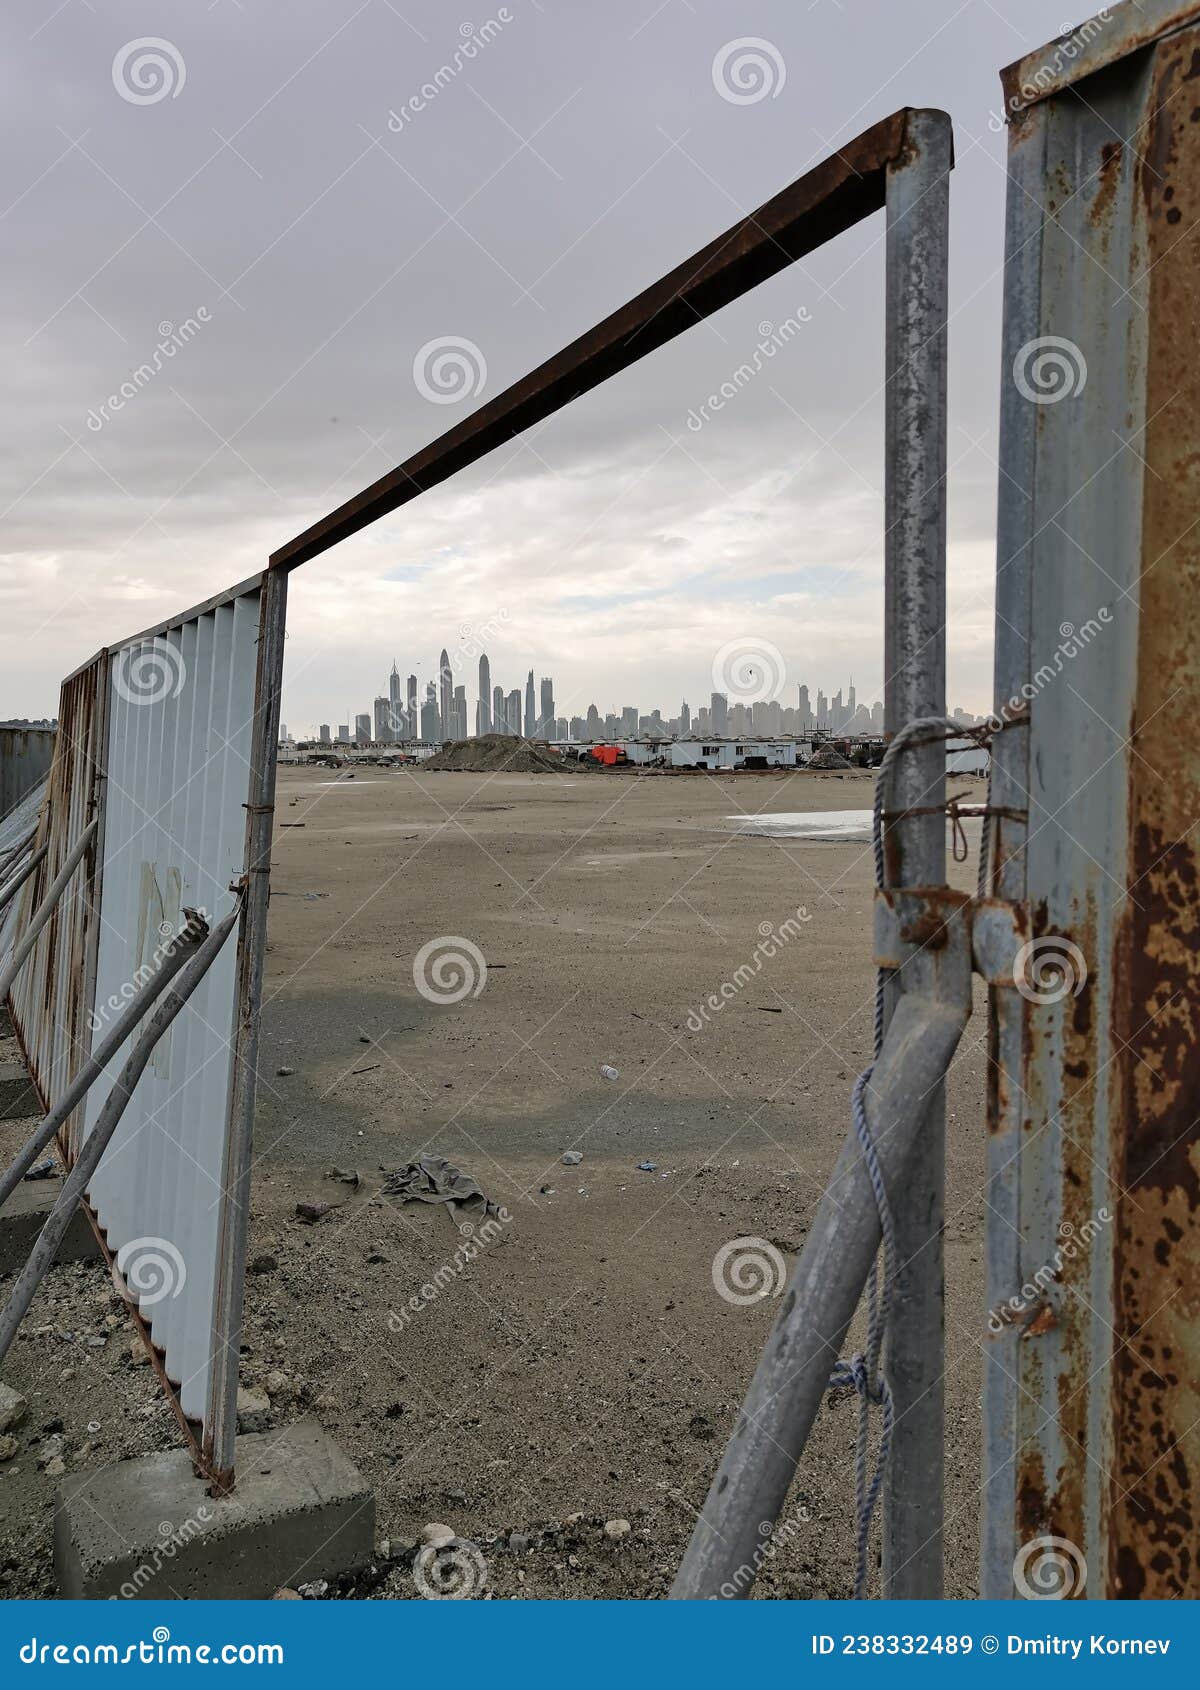 a megapolis outskirts revealling a jagged line of skyscrappers in the open gate of a construction zone